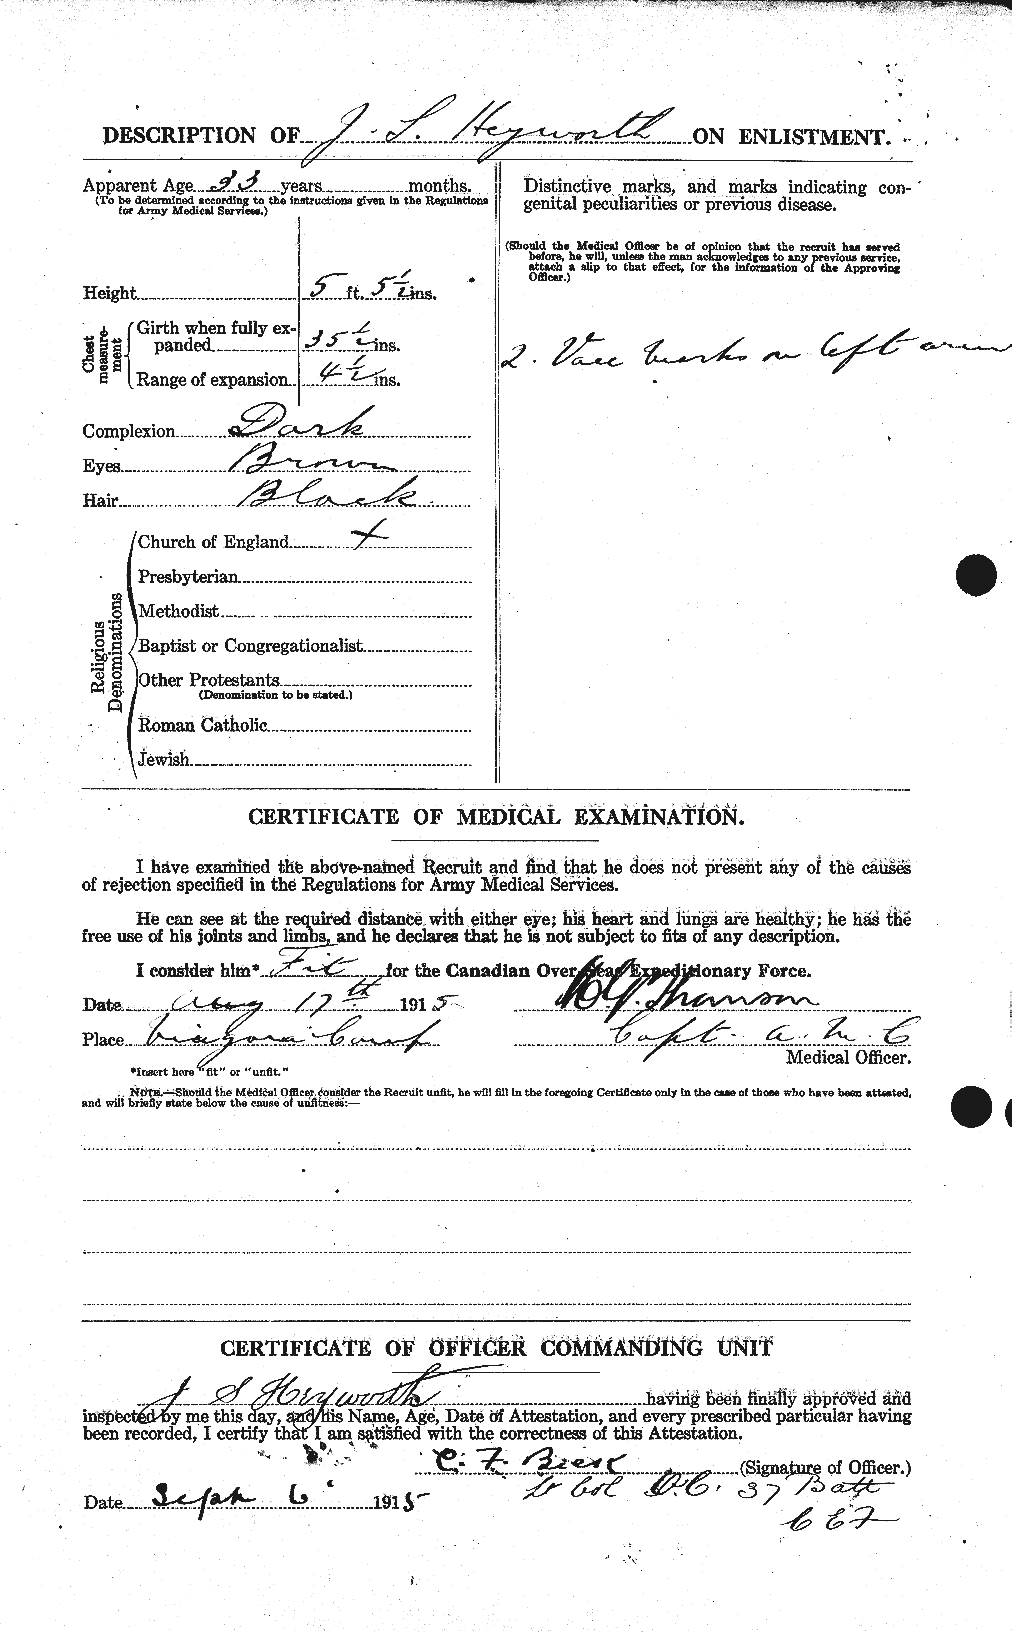 Personnel Records of the First World War - CEF 396137b